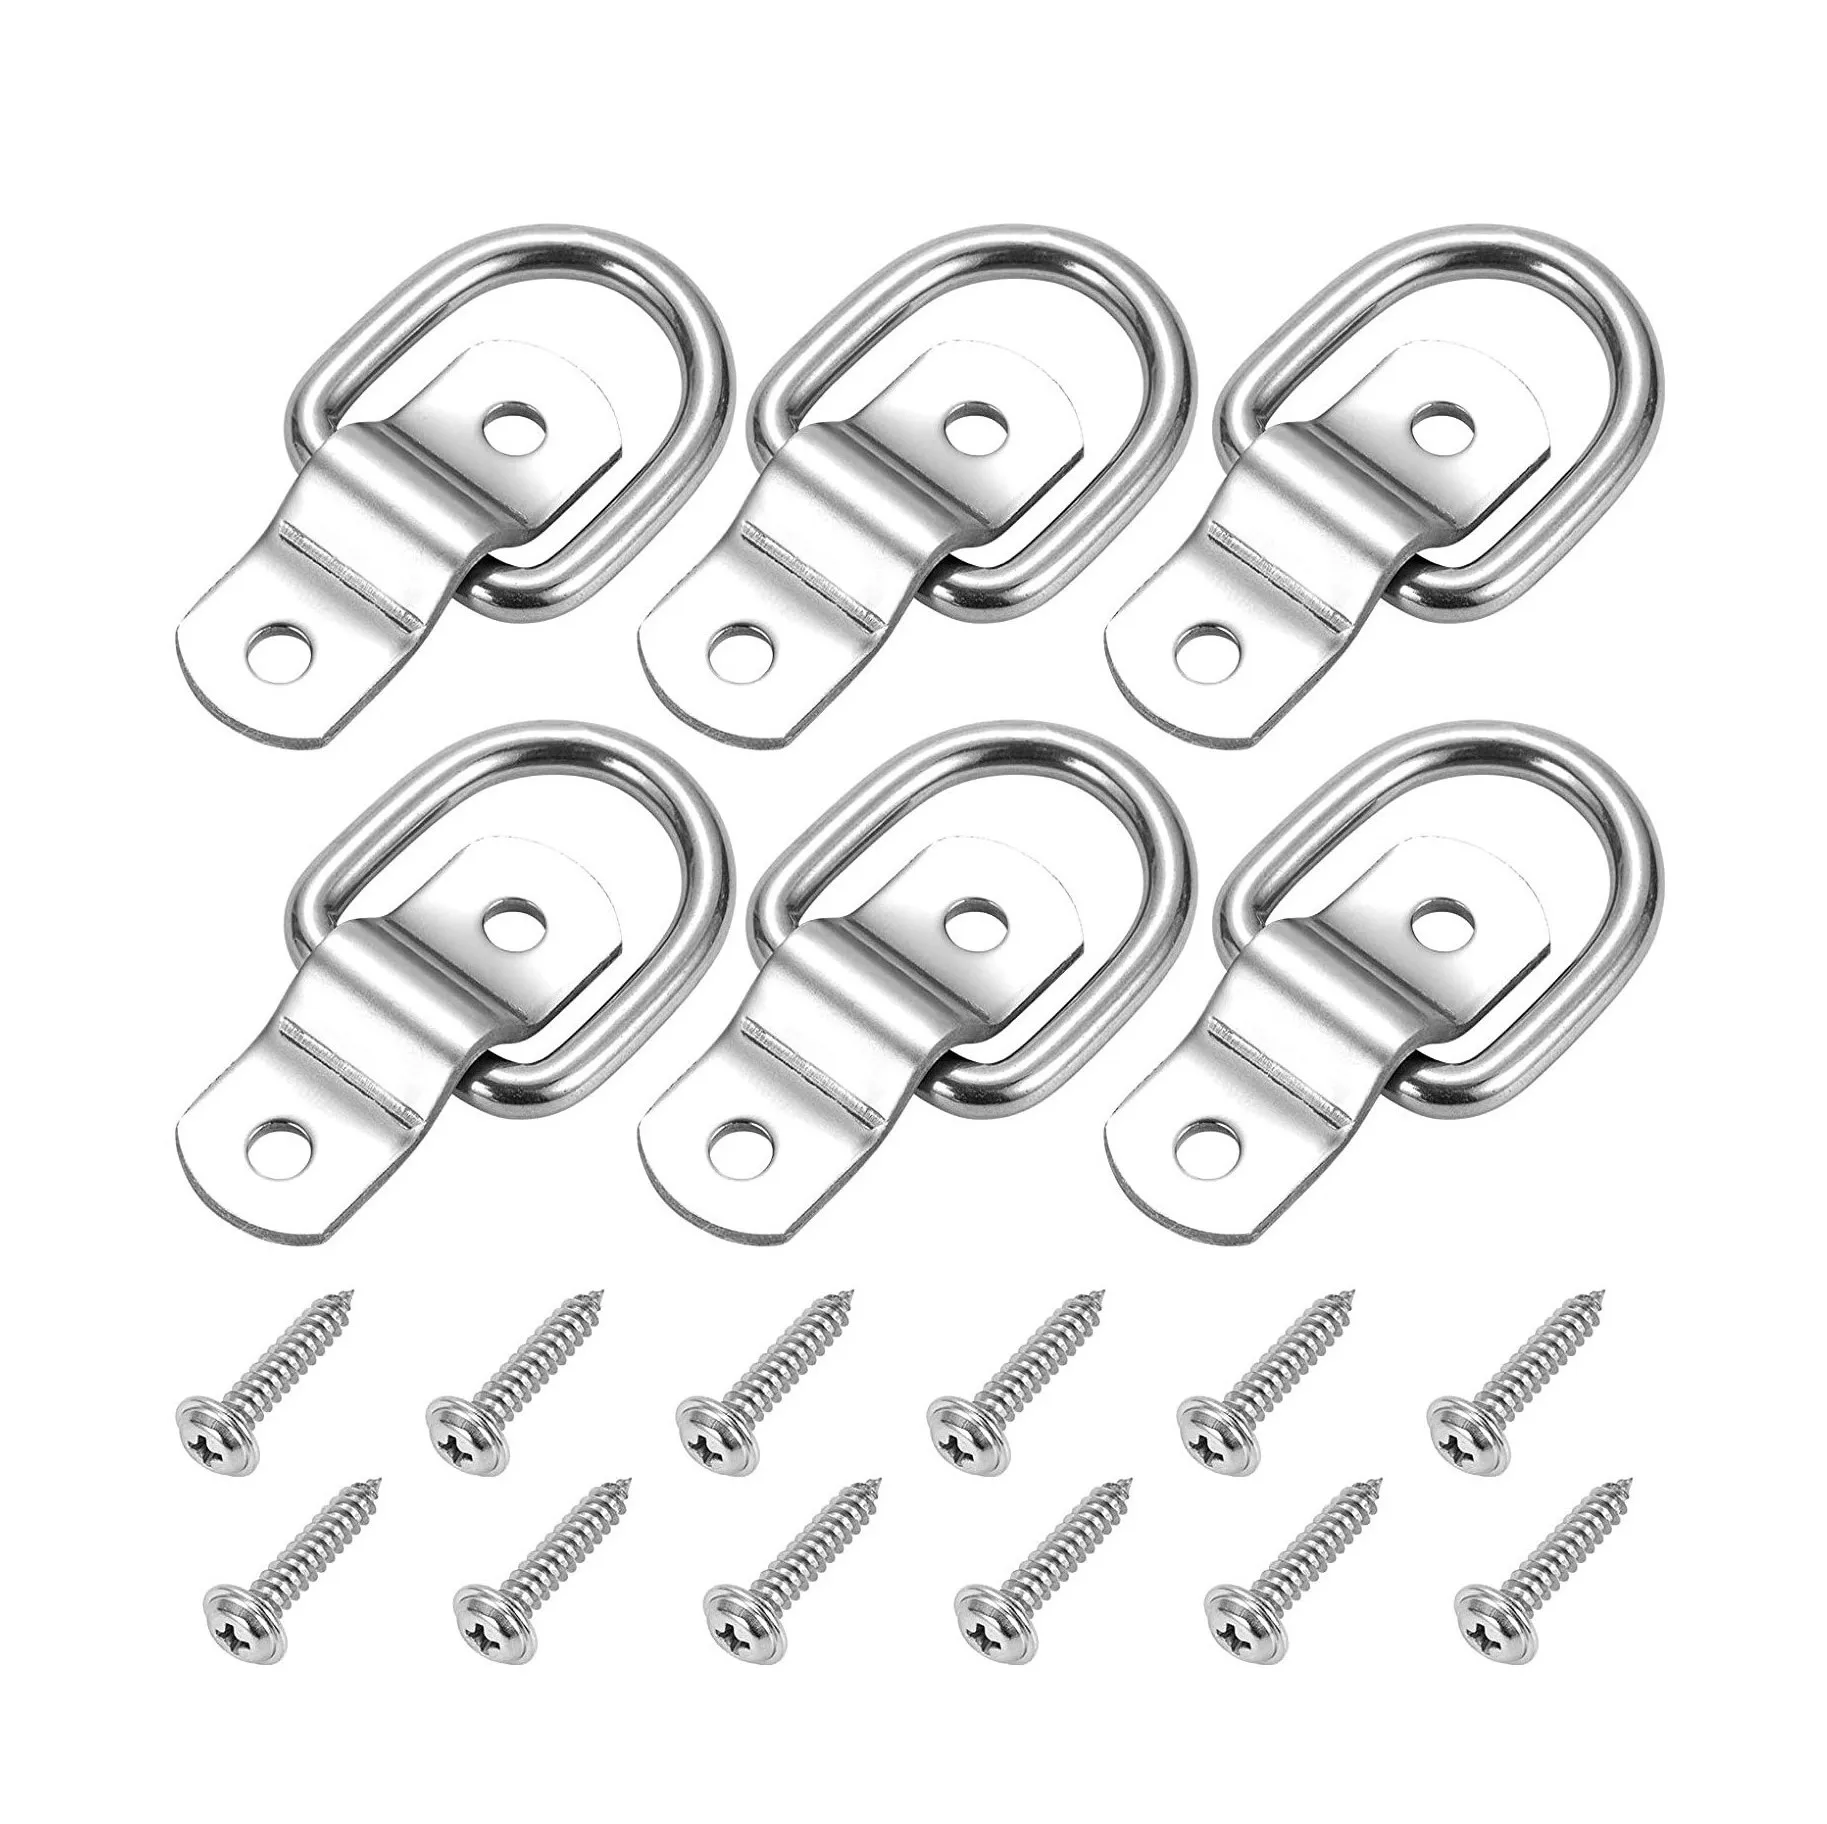 Rts 6 Pack D Ring Ratchet Tie Down Anchors 1 4 Heavy Duty Stainless Steel Trailer Tie Down Hooks With Screws Buy Tie Down Anchors Ratchet Tie Down Tie Down Hooks Product On Alibaba Com